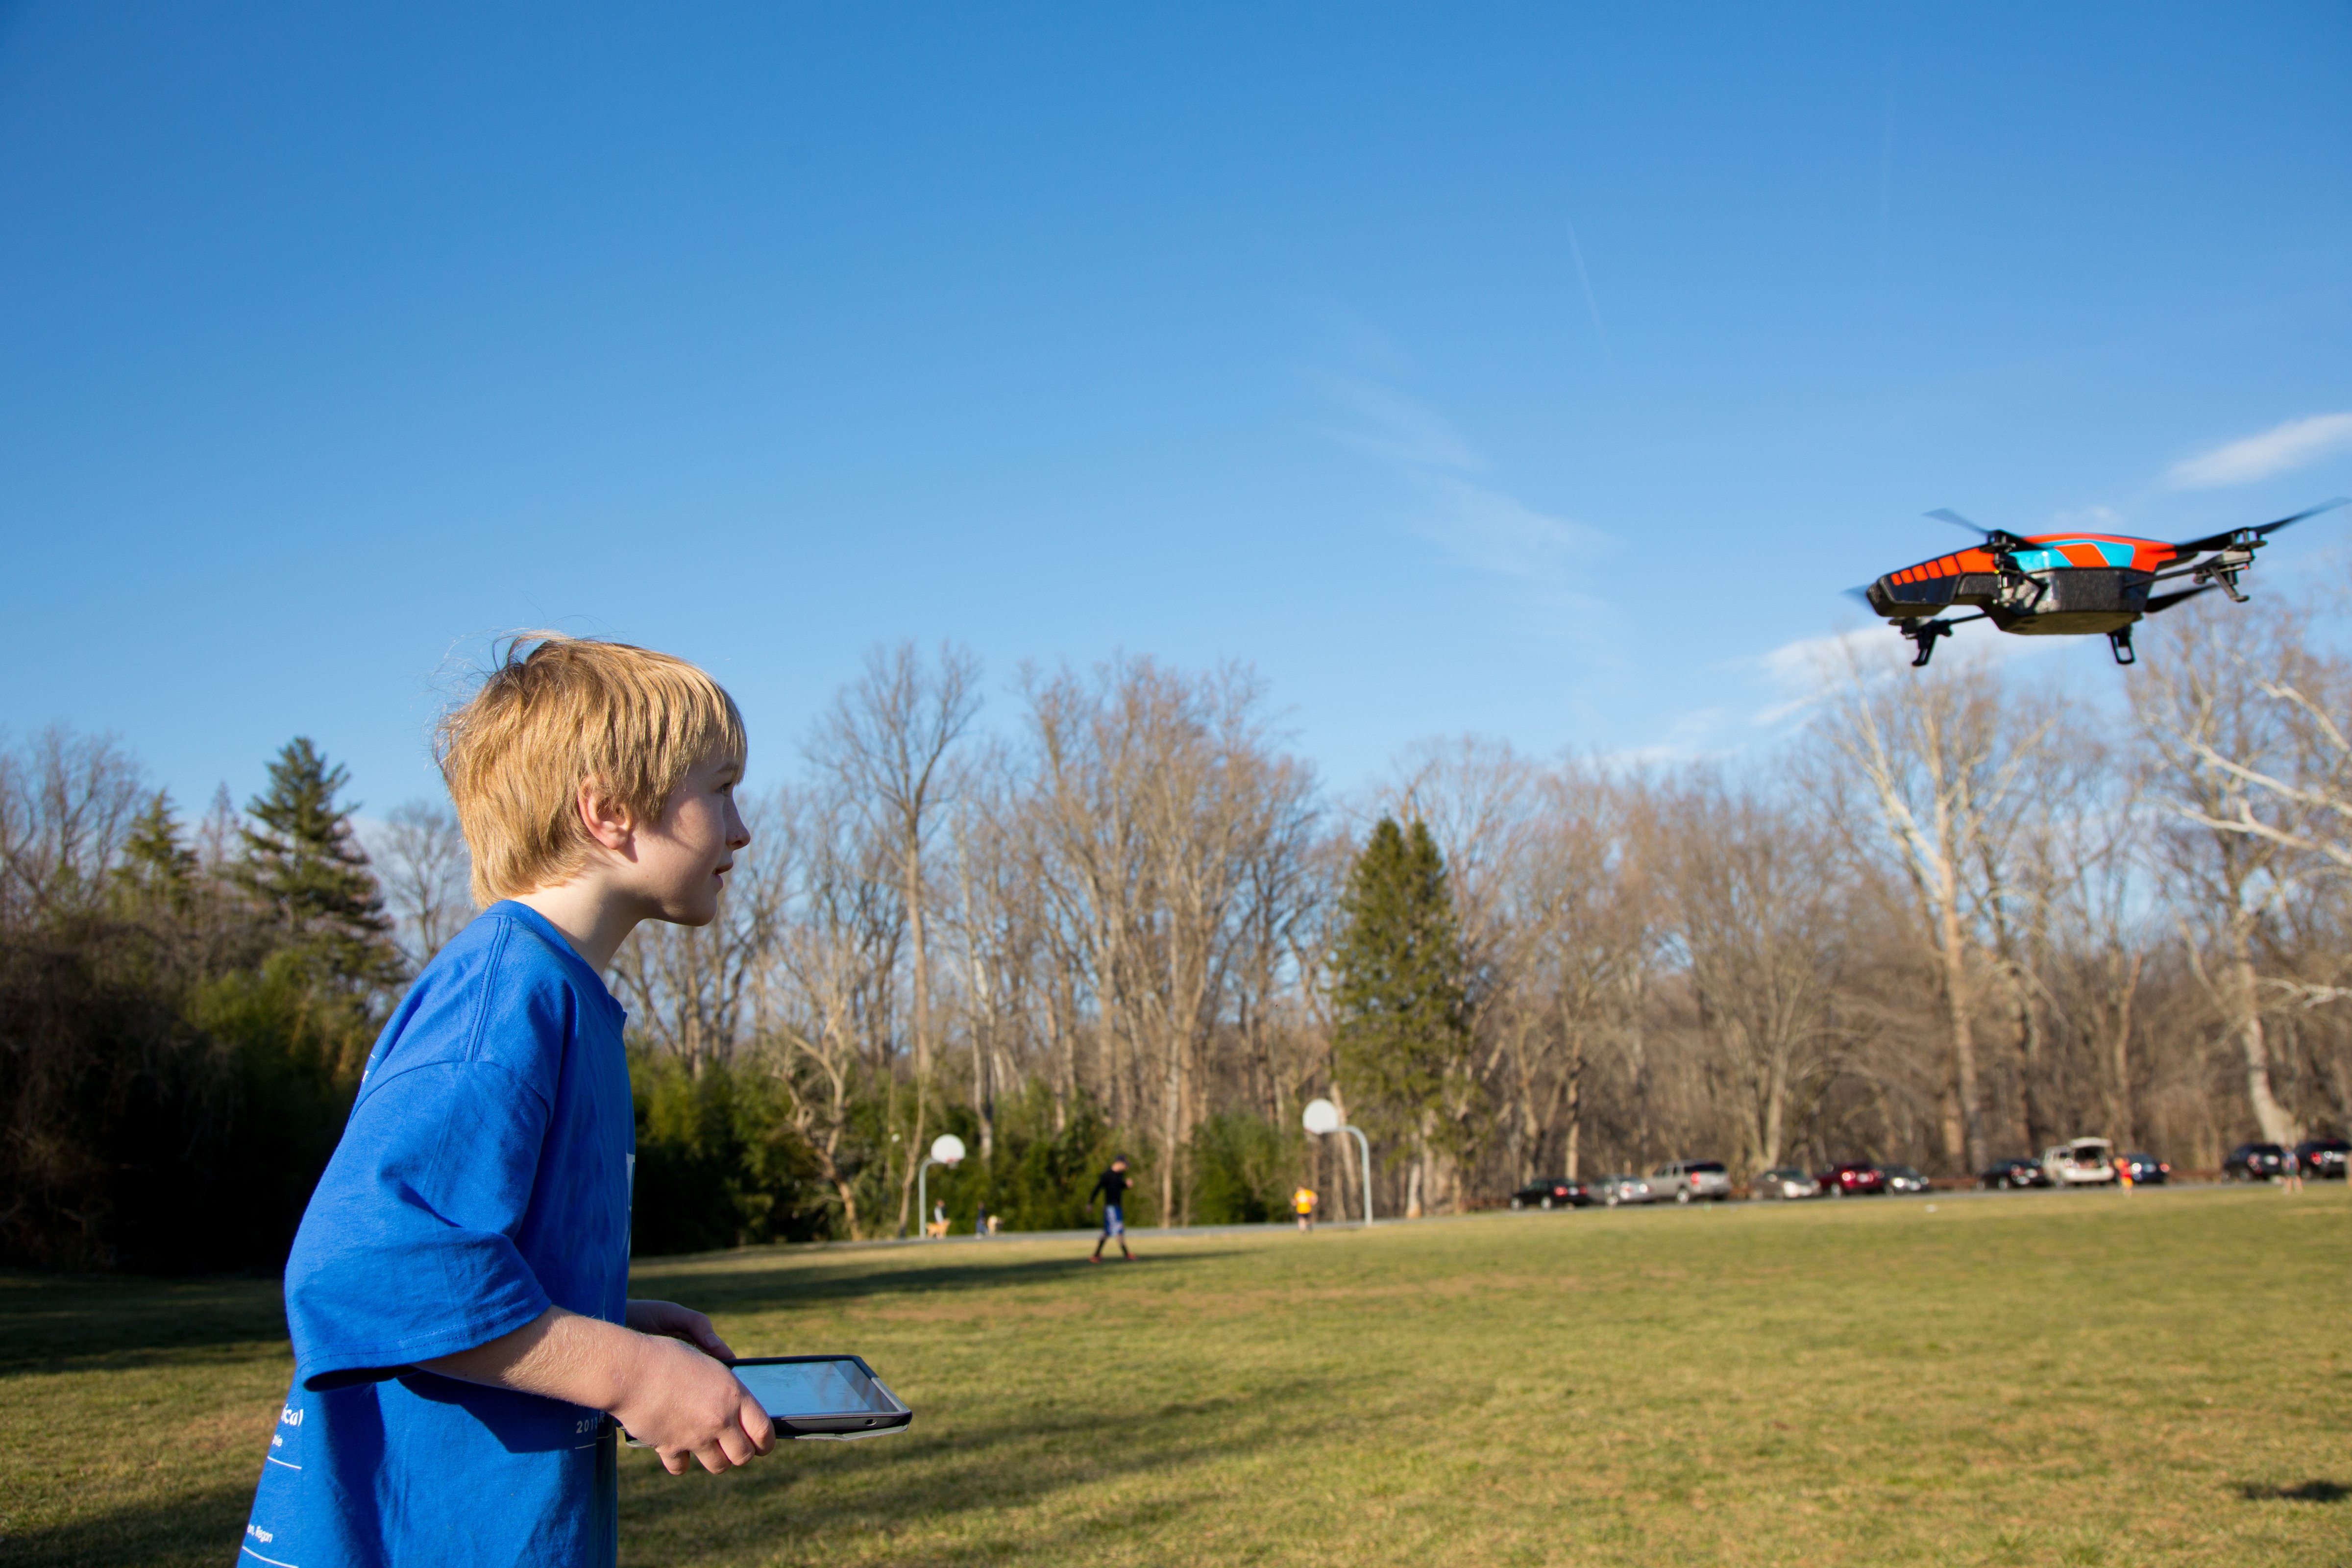 A nine year old boy flies his drone in a local park. (Skip Brown&mdash;Getty Images/National Geographic Creative)